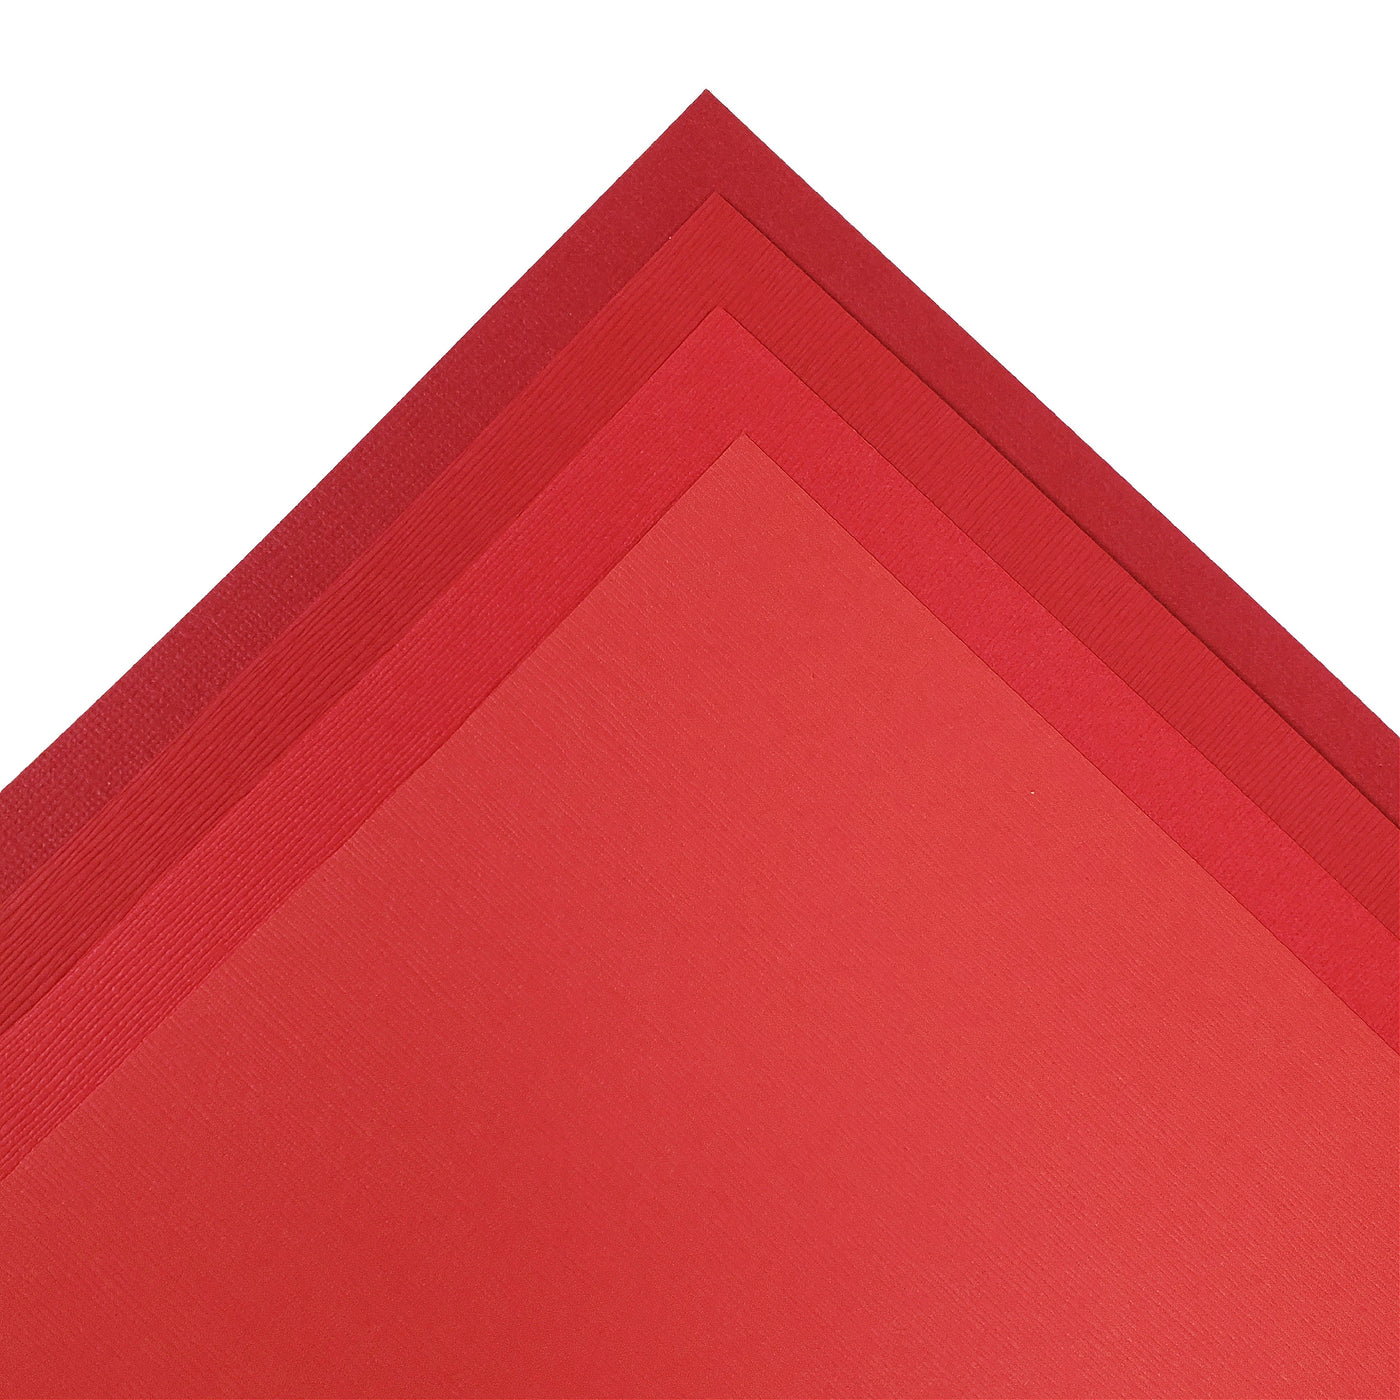 The Dark Red monochromatic assortment includes three (3) each of four (4) shades of red colors of Bazzill textured cardstock.